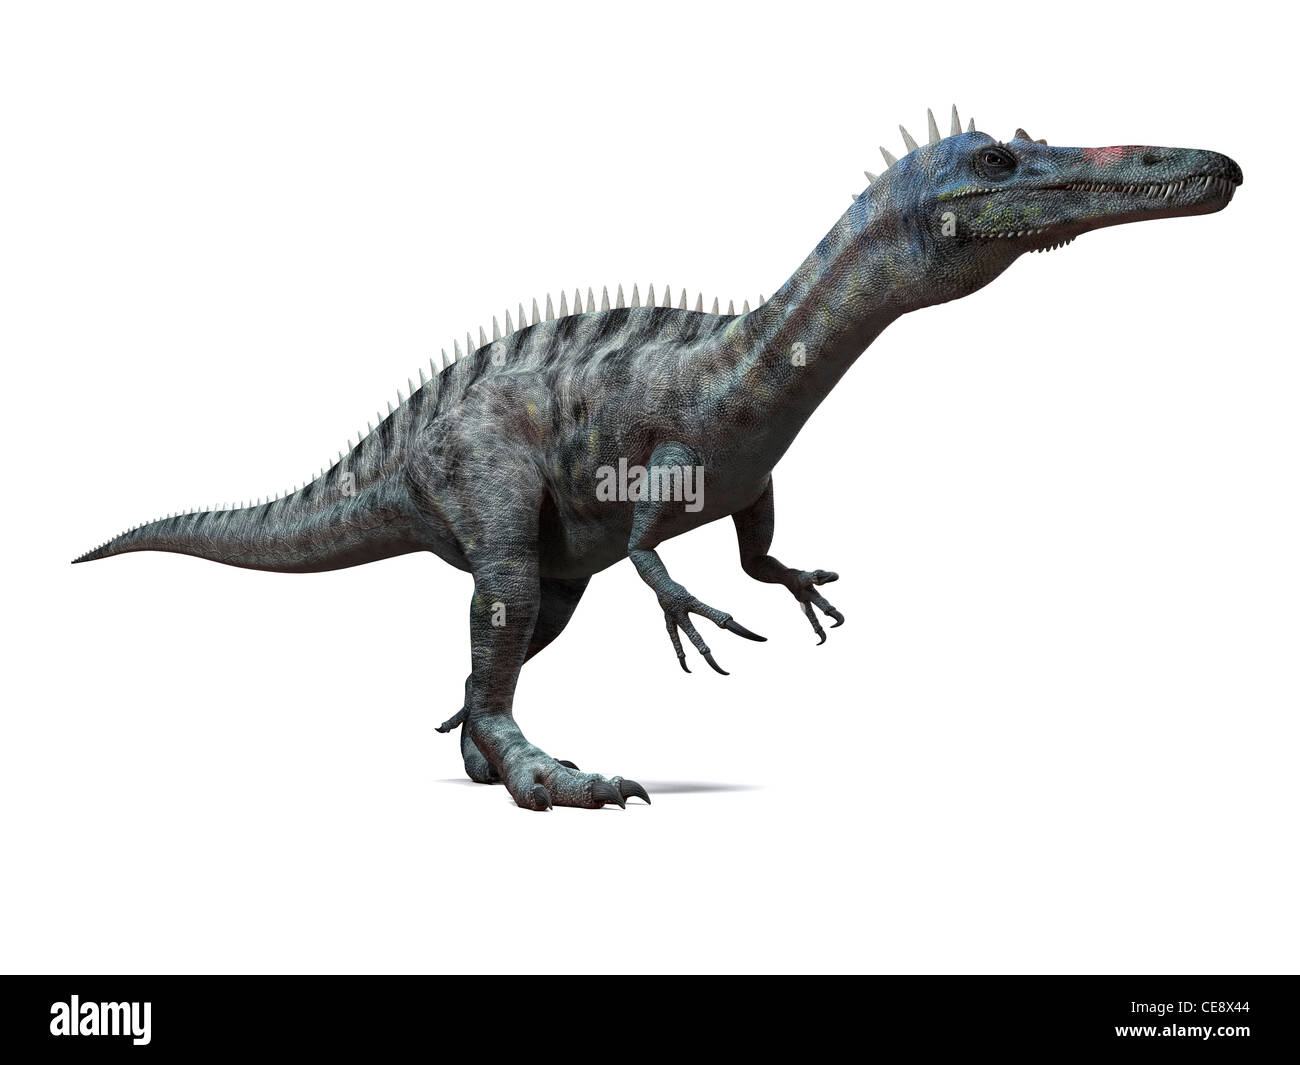 Suchomimus dinosaur computer artwork dinosaur lived 110 to 120 million years ago during the middle the Cretaceous period. Stock Photo